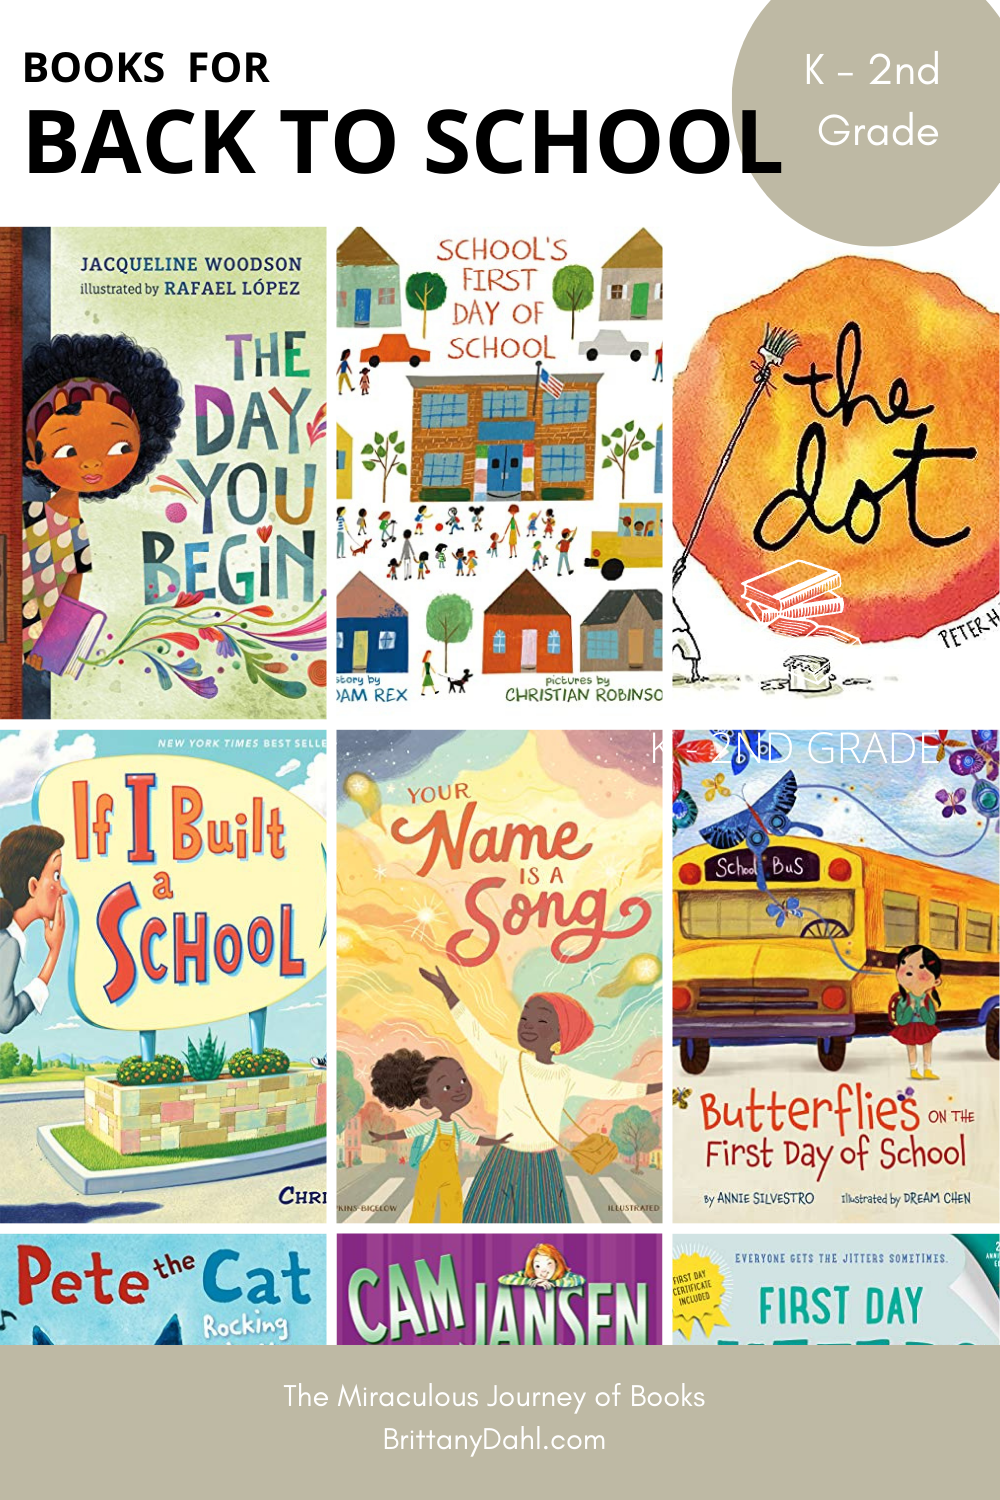 Books for Back to School for K - 2nd Grade from The Miraculous Journey of Books at BrittanyDahl.com. Image of books recommended on this book list.